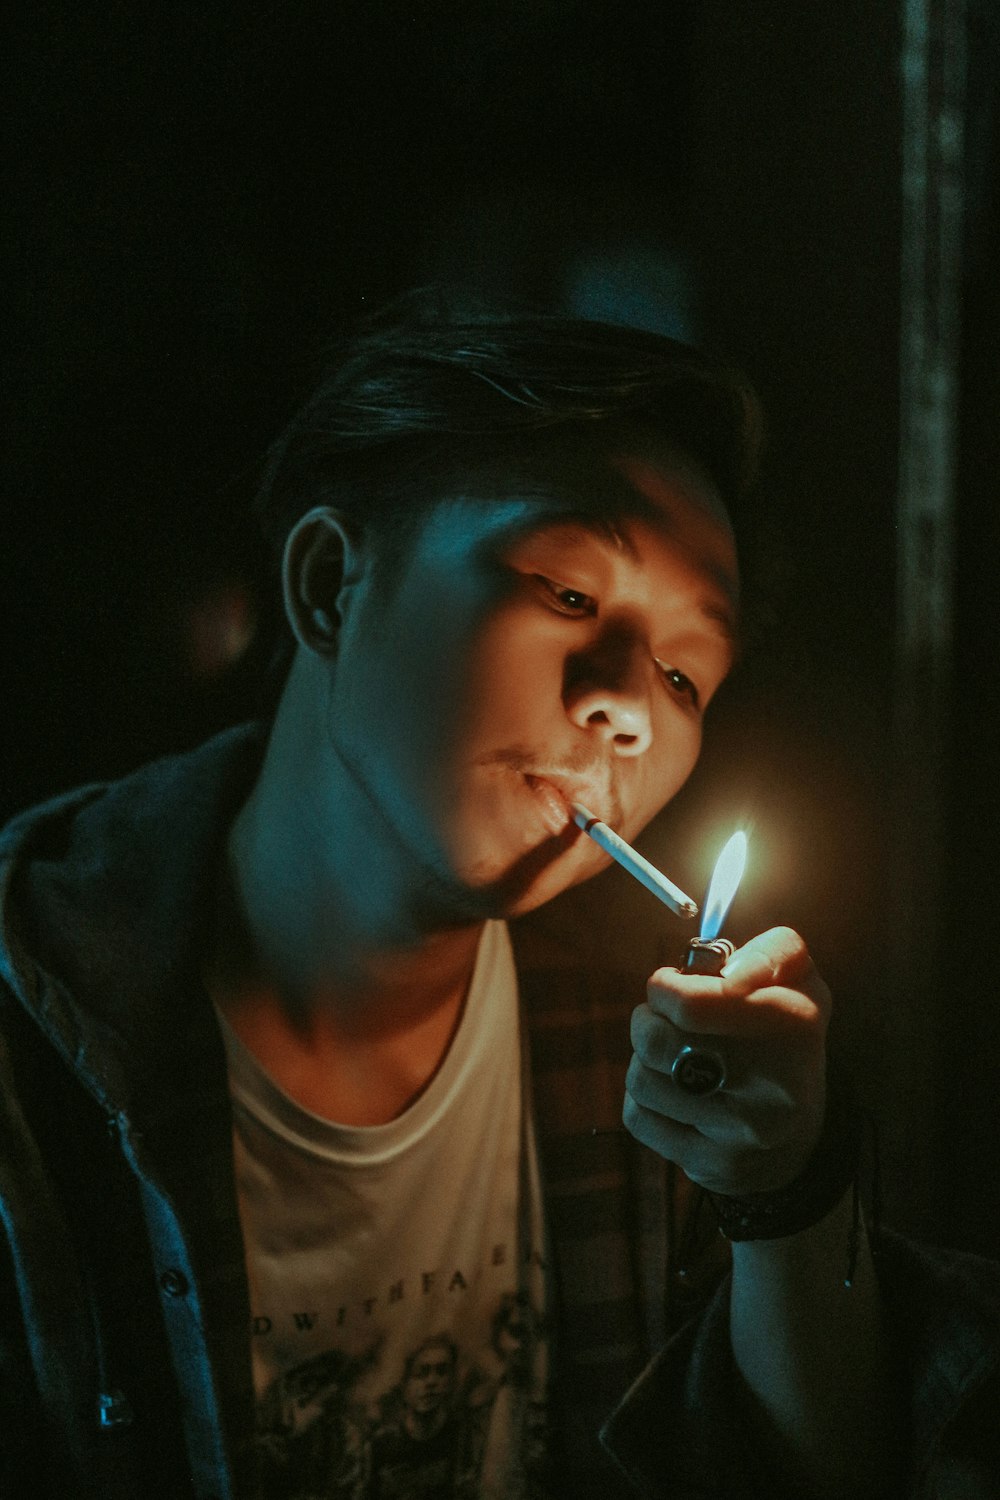 Man lighting cigarette in his mouth photo – Free People Image on Unsplash